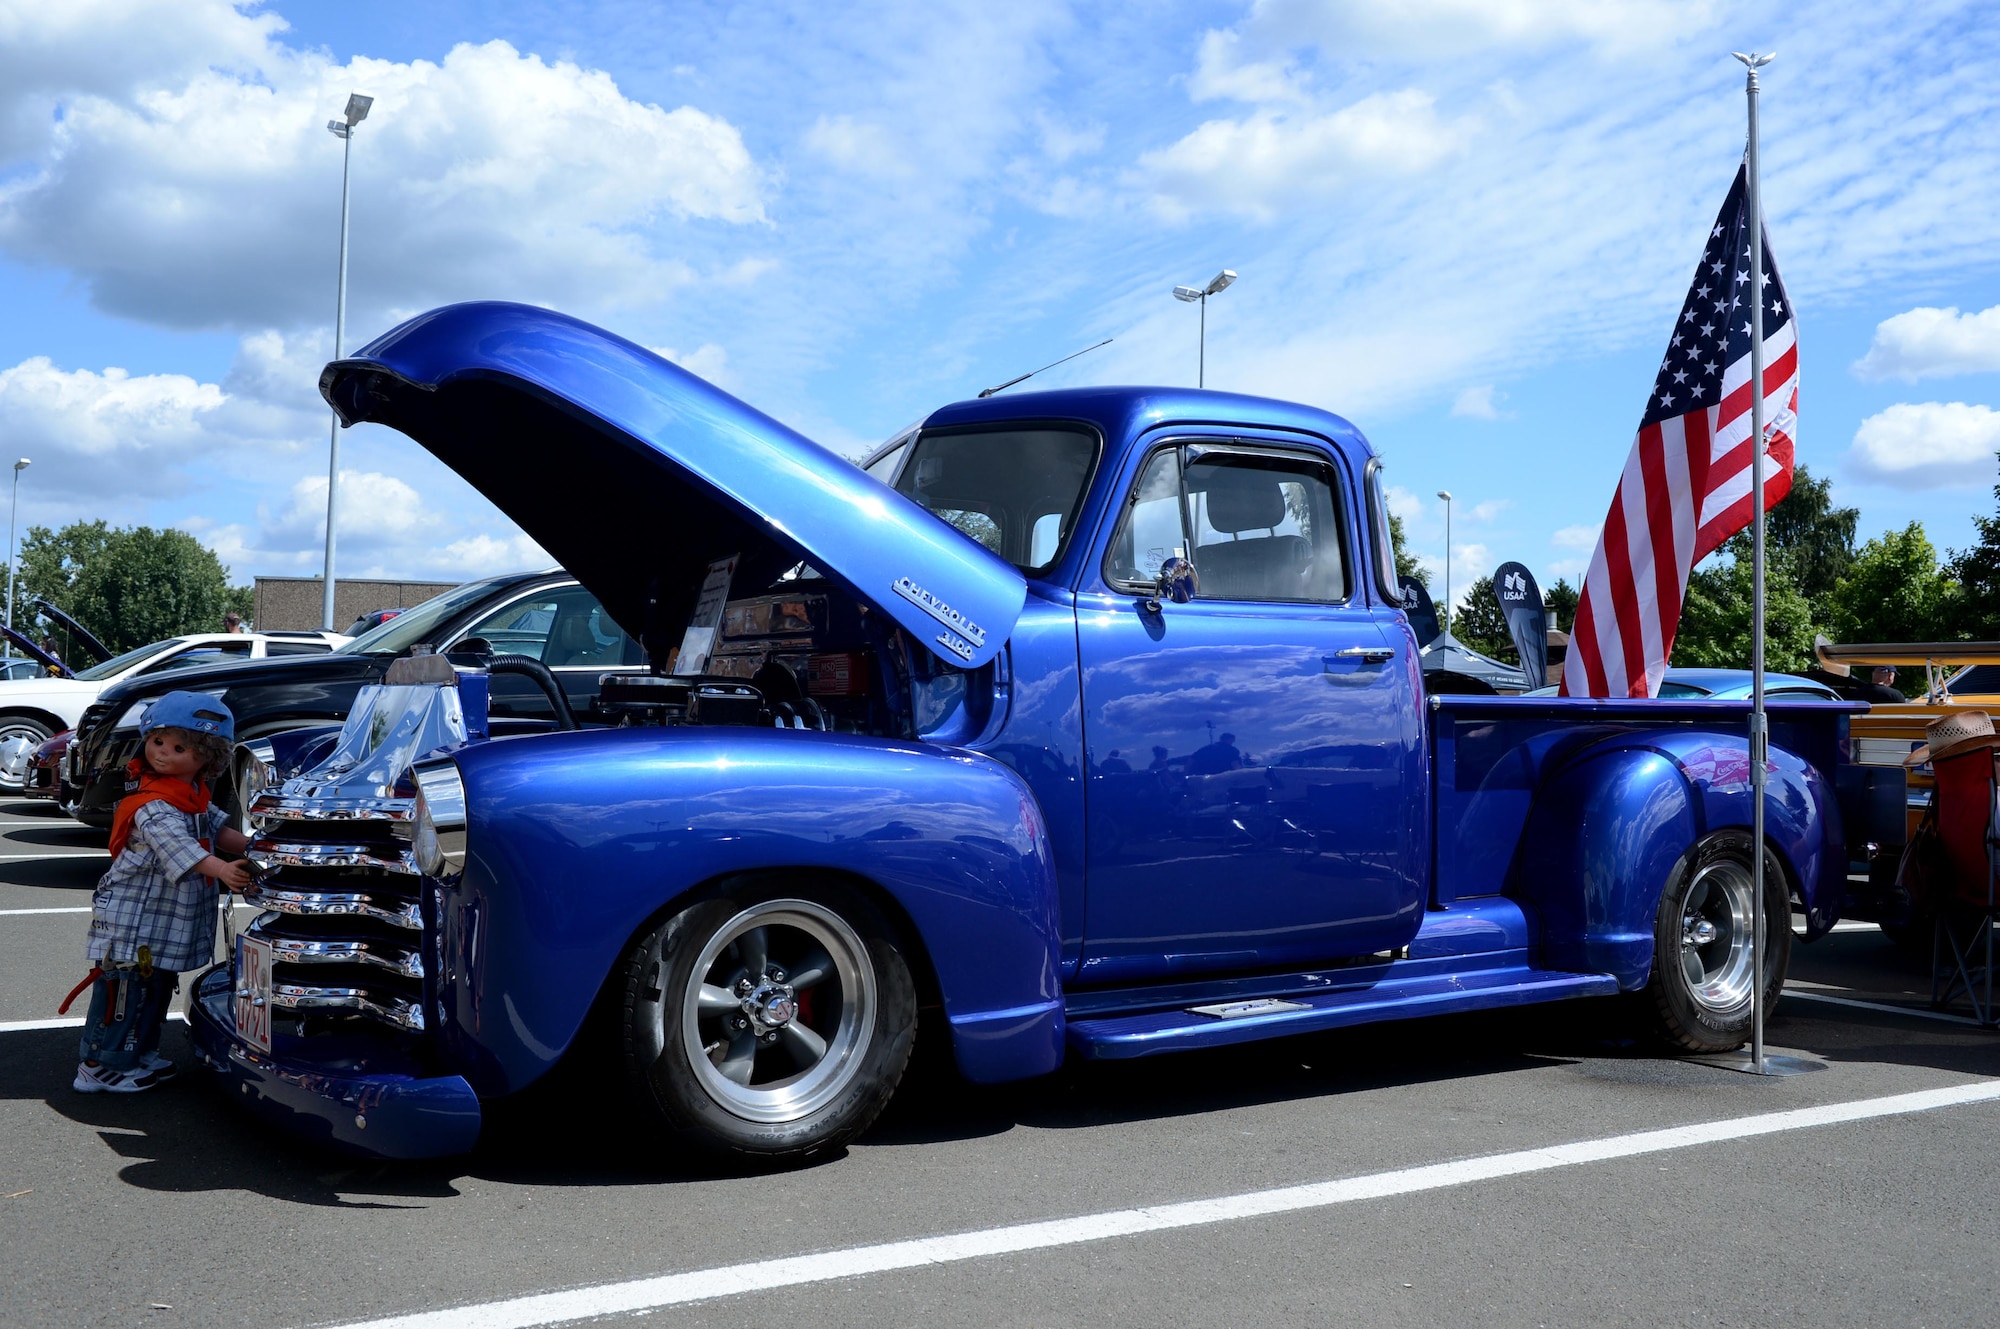 SPANGDAHLEM AIR BASE, Germany – A Chevrolet 3100 is displayed in the 12th annual Motor Weekend contest, Aug. 04, 2013. Compared to previous years, the annual Motor Weekend has grown in popularity and displayed more than 240 cars this year. (U.S. Air Force photo by Airman 1st Class Kyle Gese/Released)